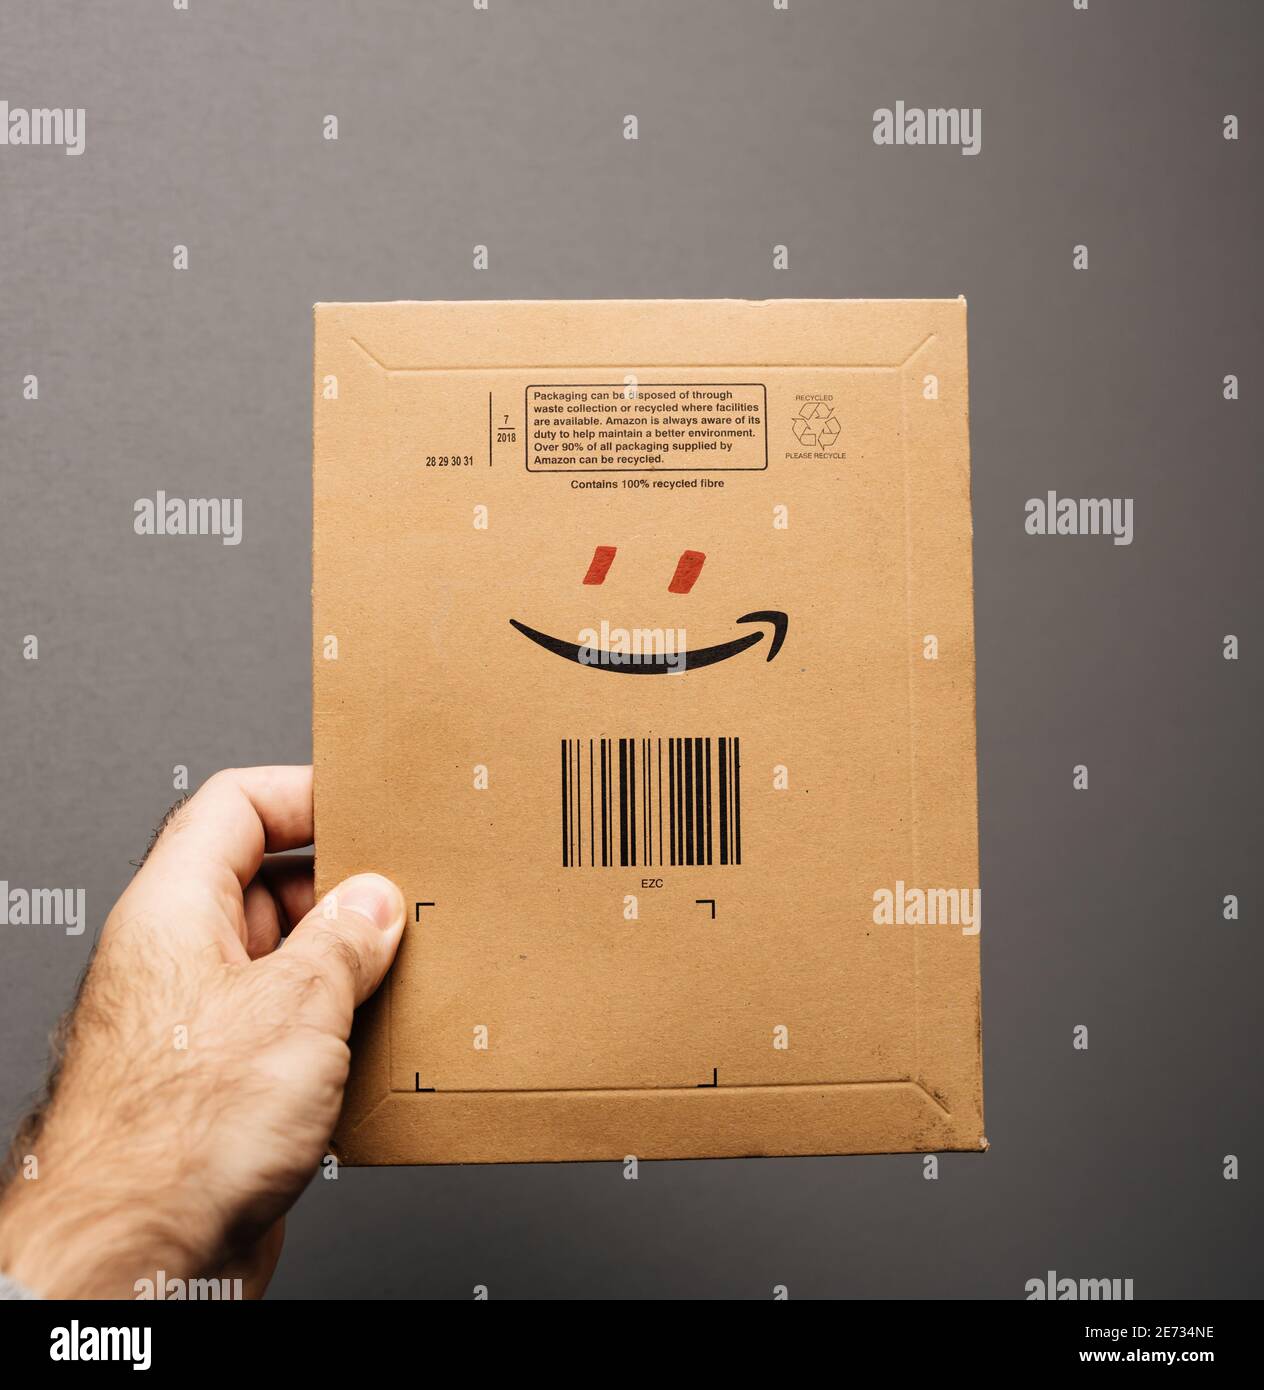 Paris, France - Oct 29, 2018: POV male hand holding Amazon Prime parcel envelope with smile logo and add red eyes to form a smiling human character Stock Photo